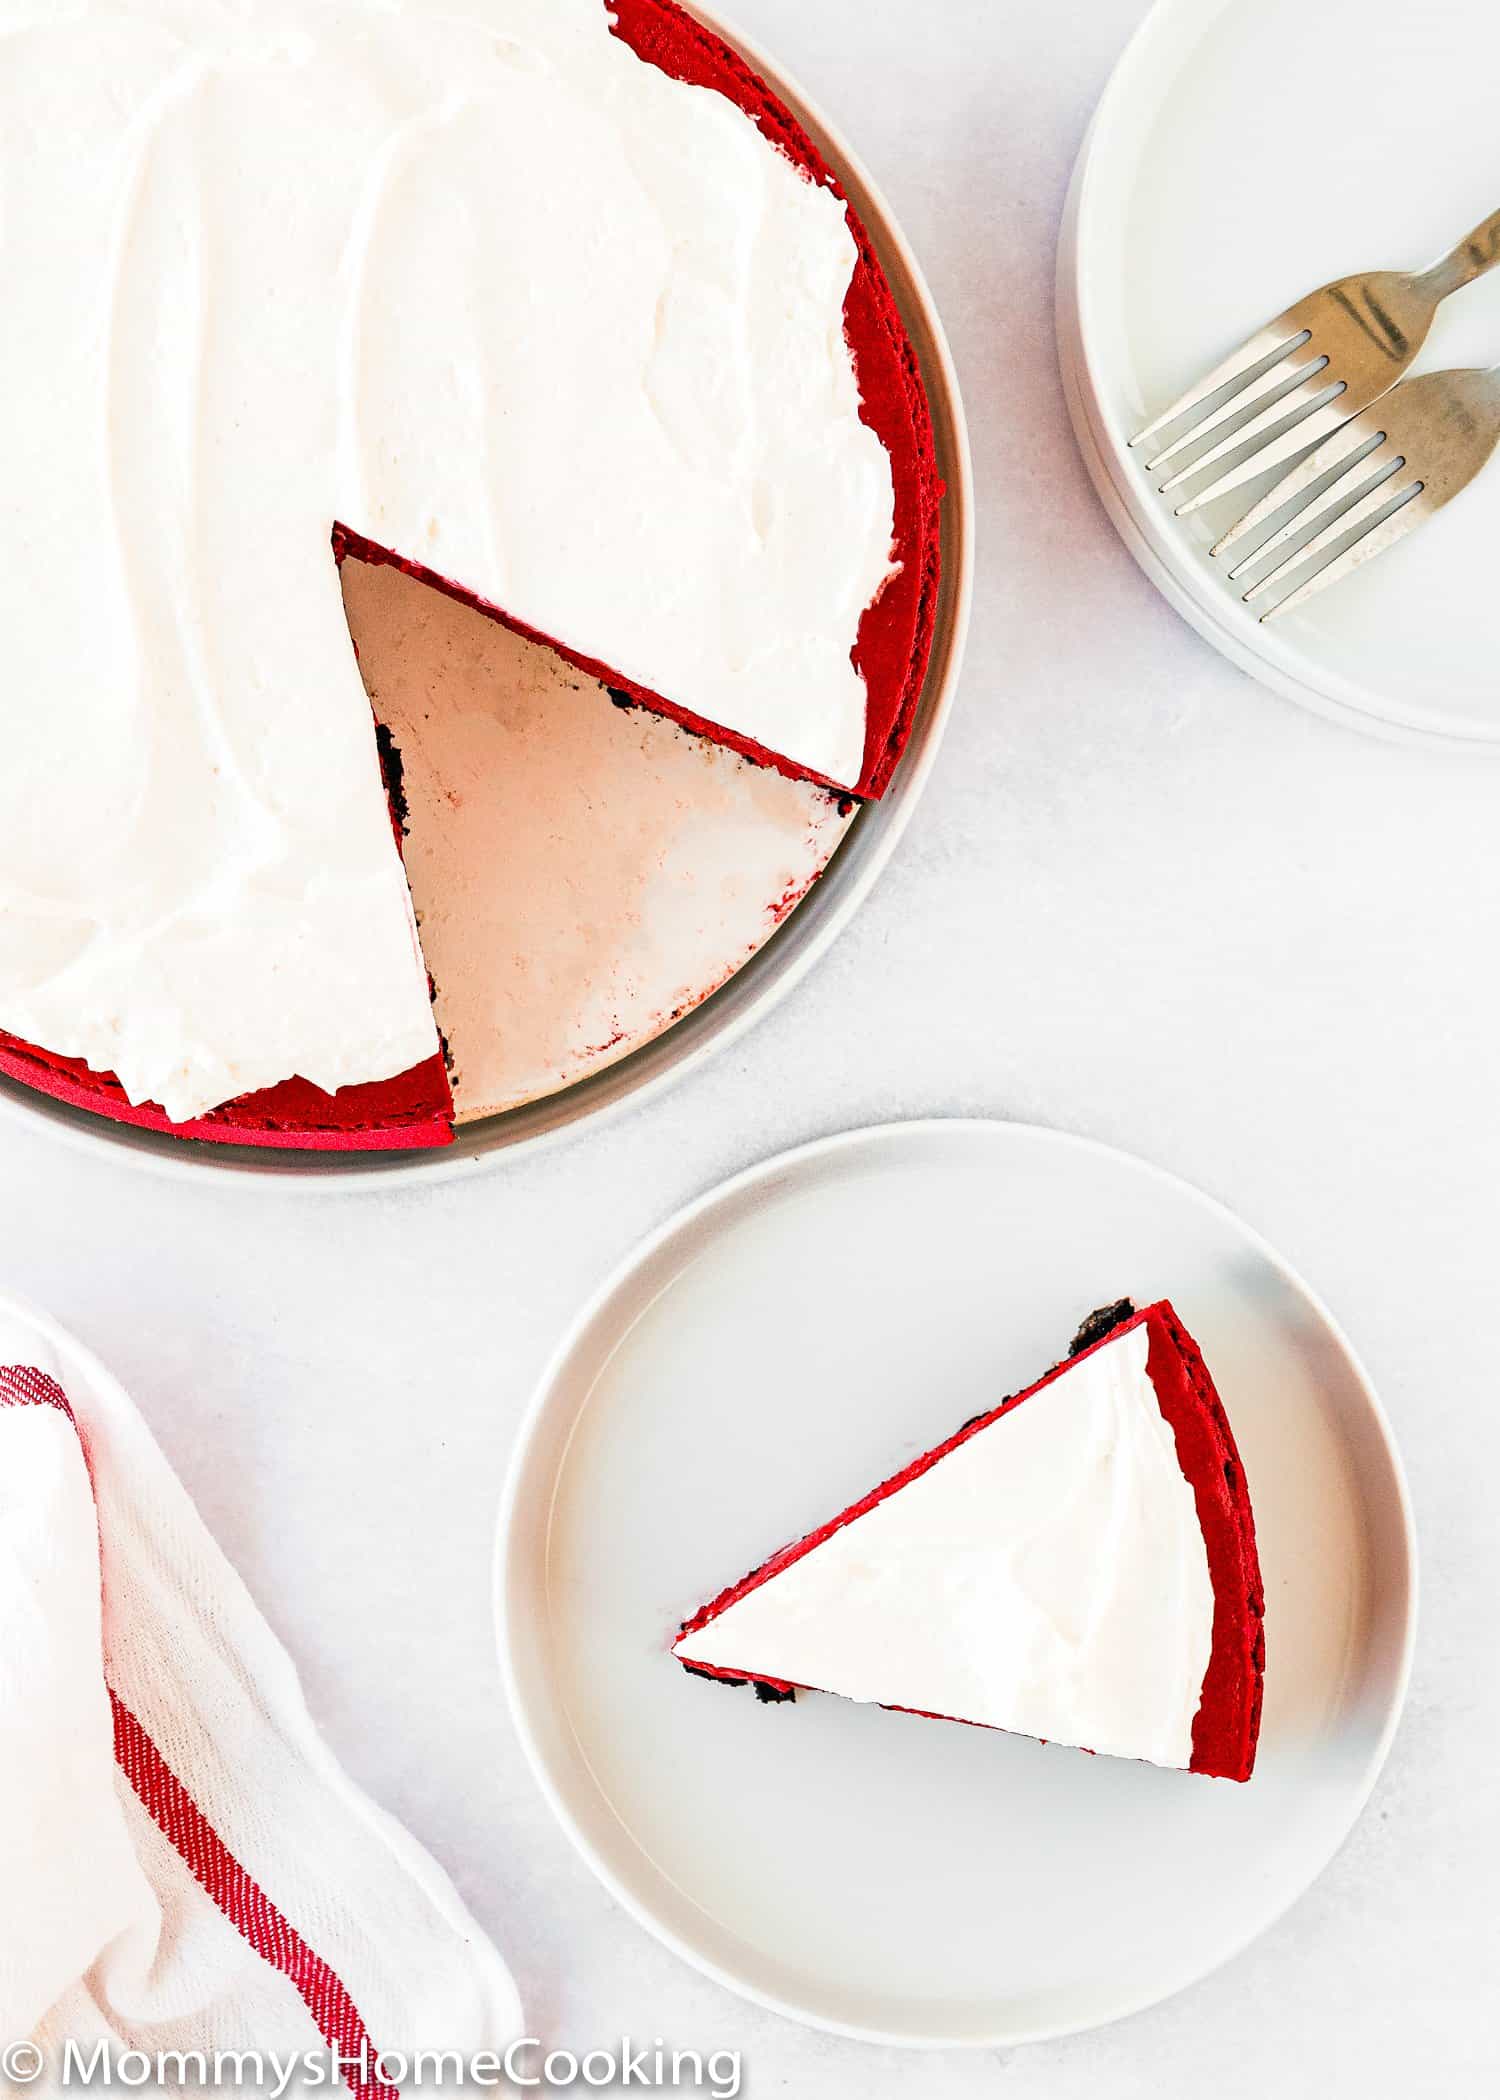 cut Eggless Red Velvet Cheesecake over a white surface